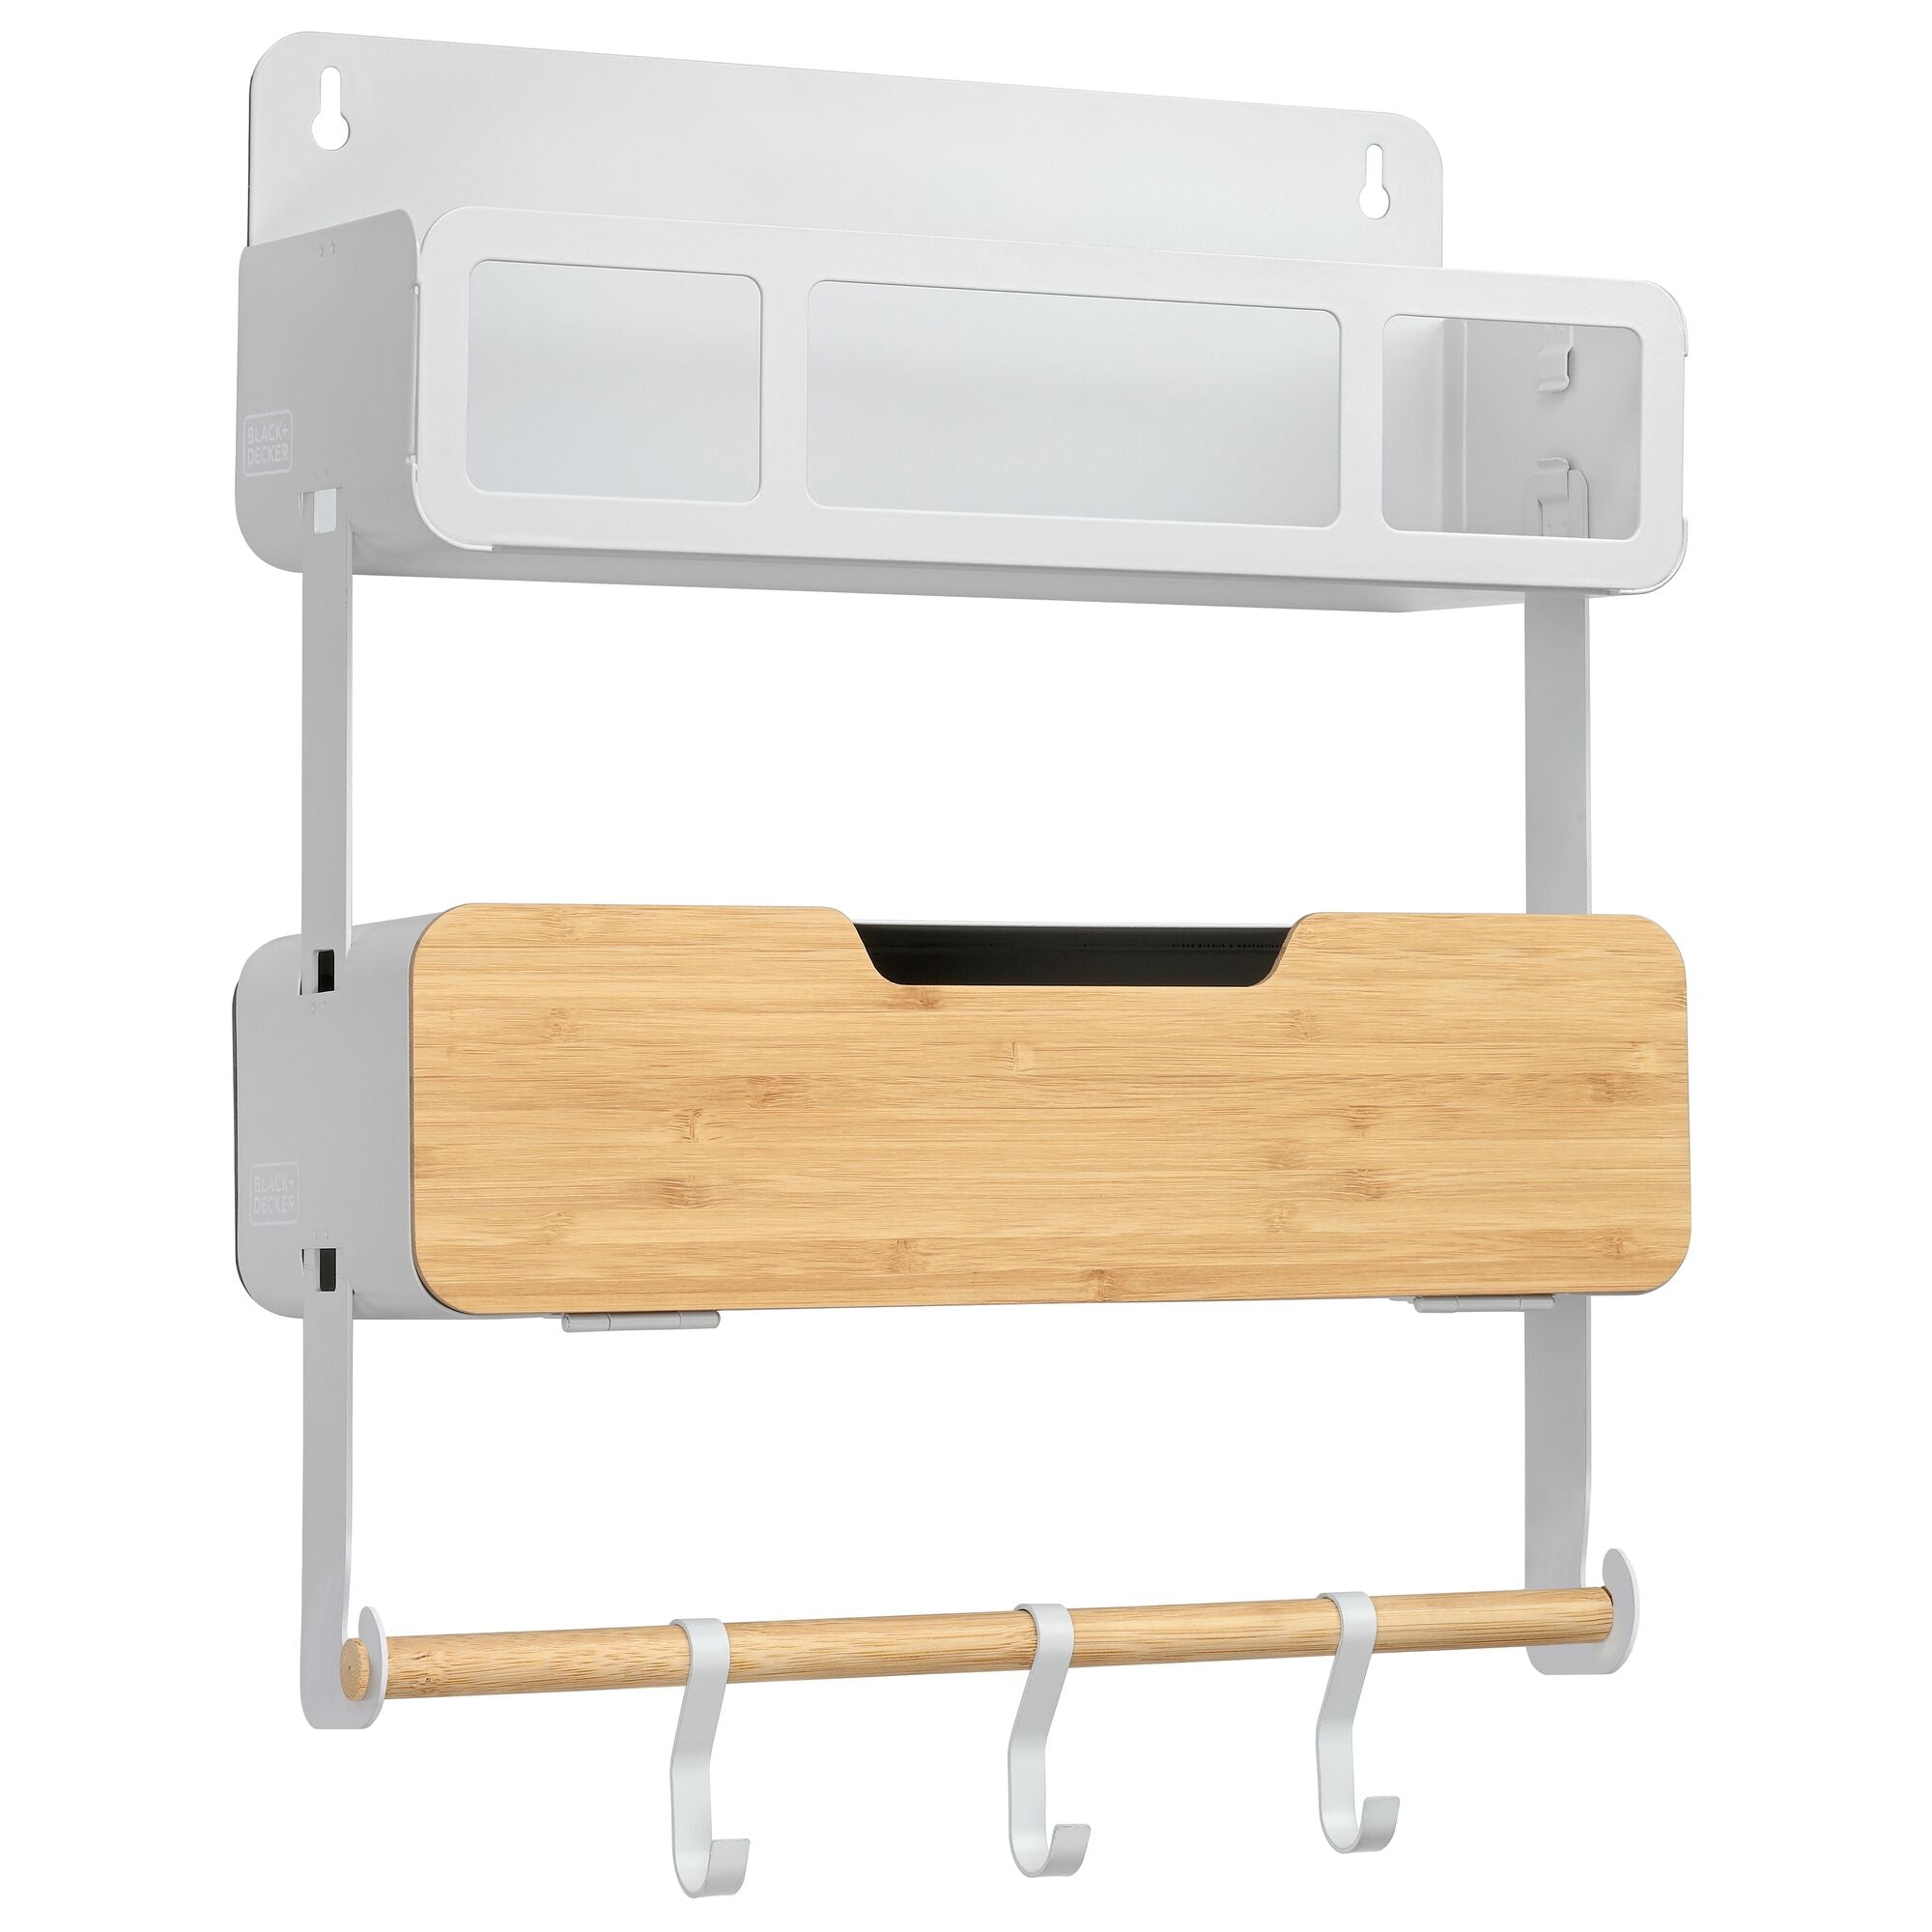 Black and decker hanging rack system combo kit in white and tan